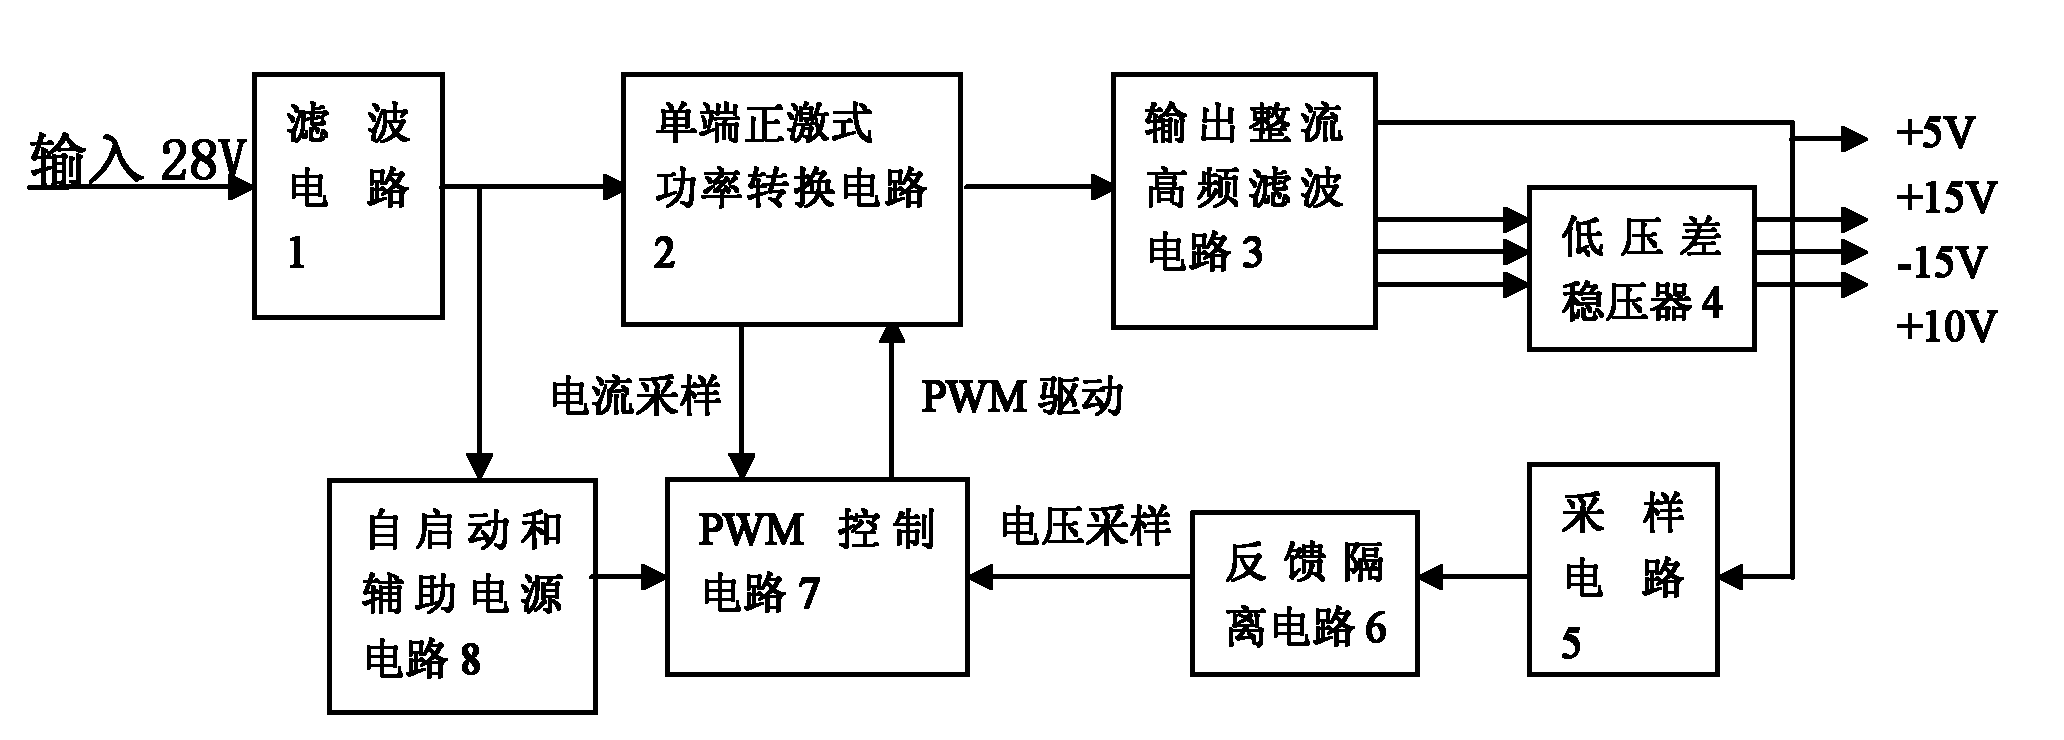 Low-voltage power supply multi-path output power